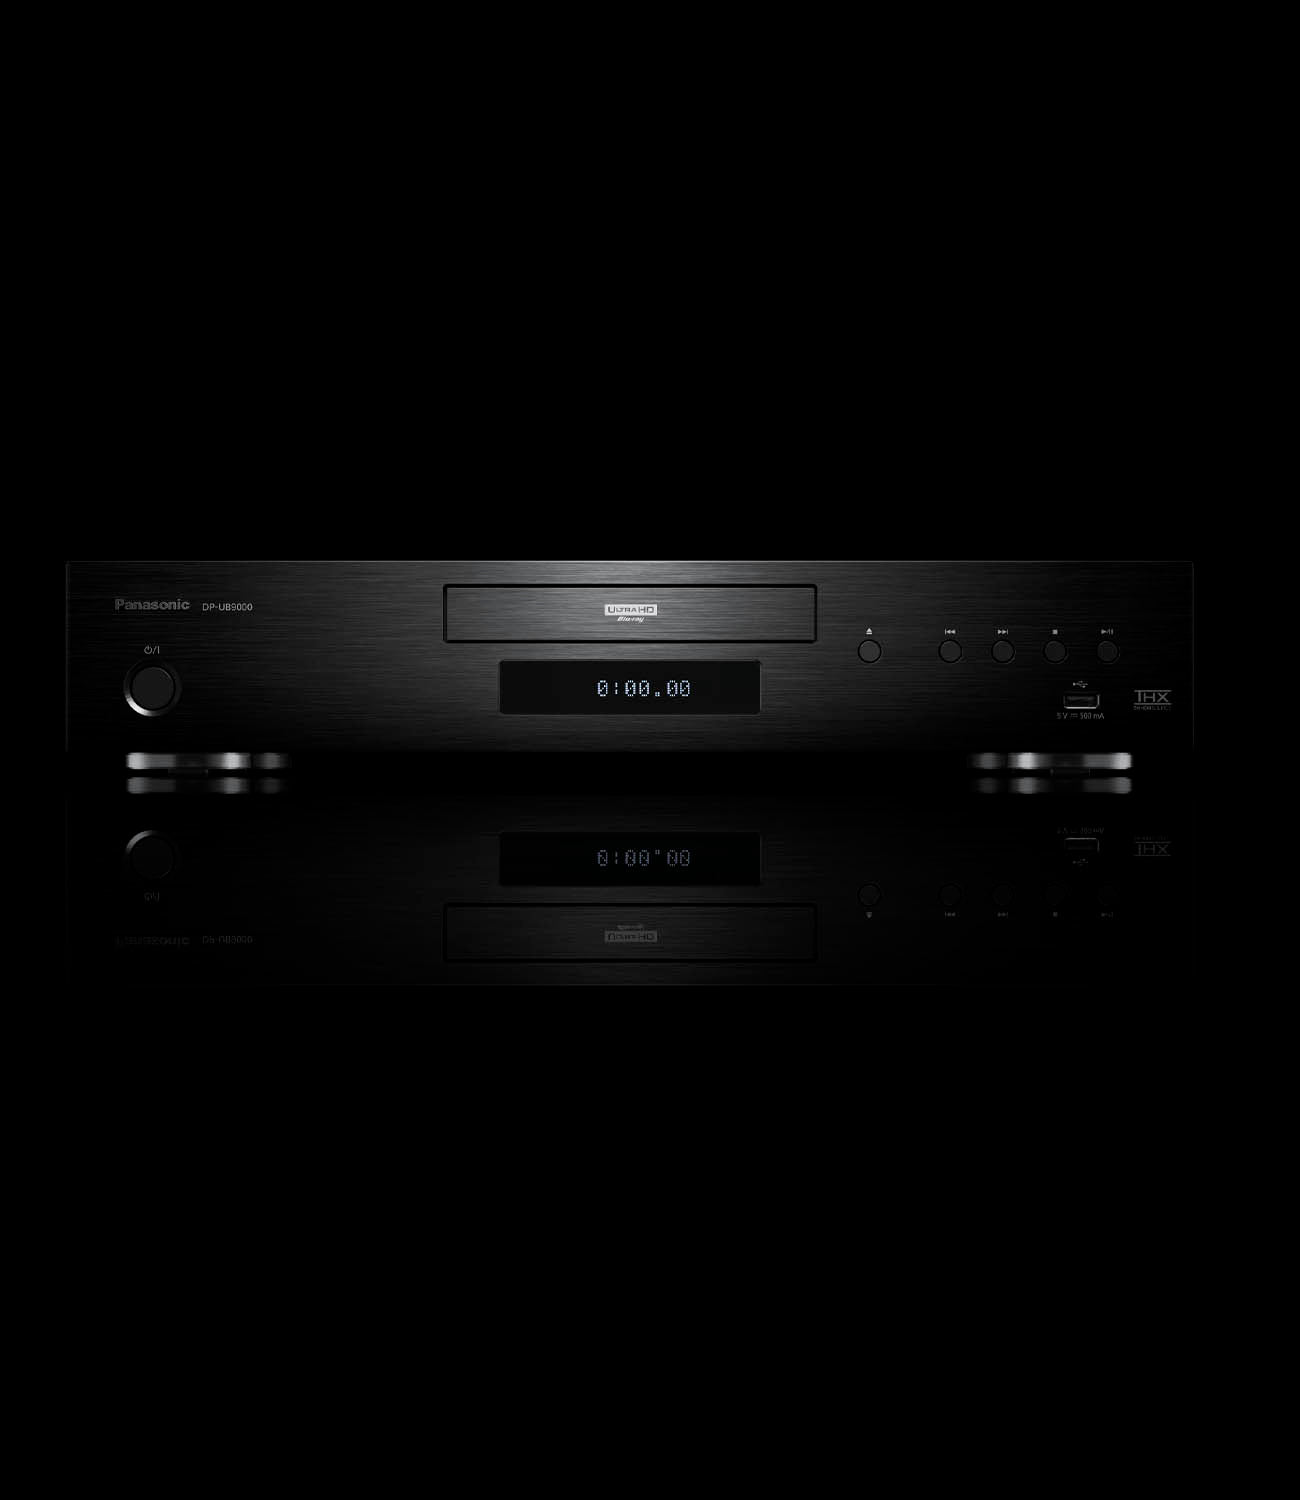 Panasonic Reference Class 4K Ultra HD Blu-ray Player with Dolby Vision, Ultra  HD Premium Video Playback, HDR10+, Hi-Res Audio - DP-UB9000P1K